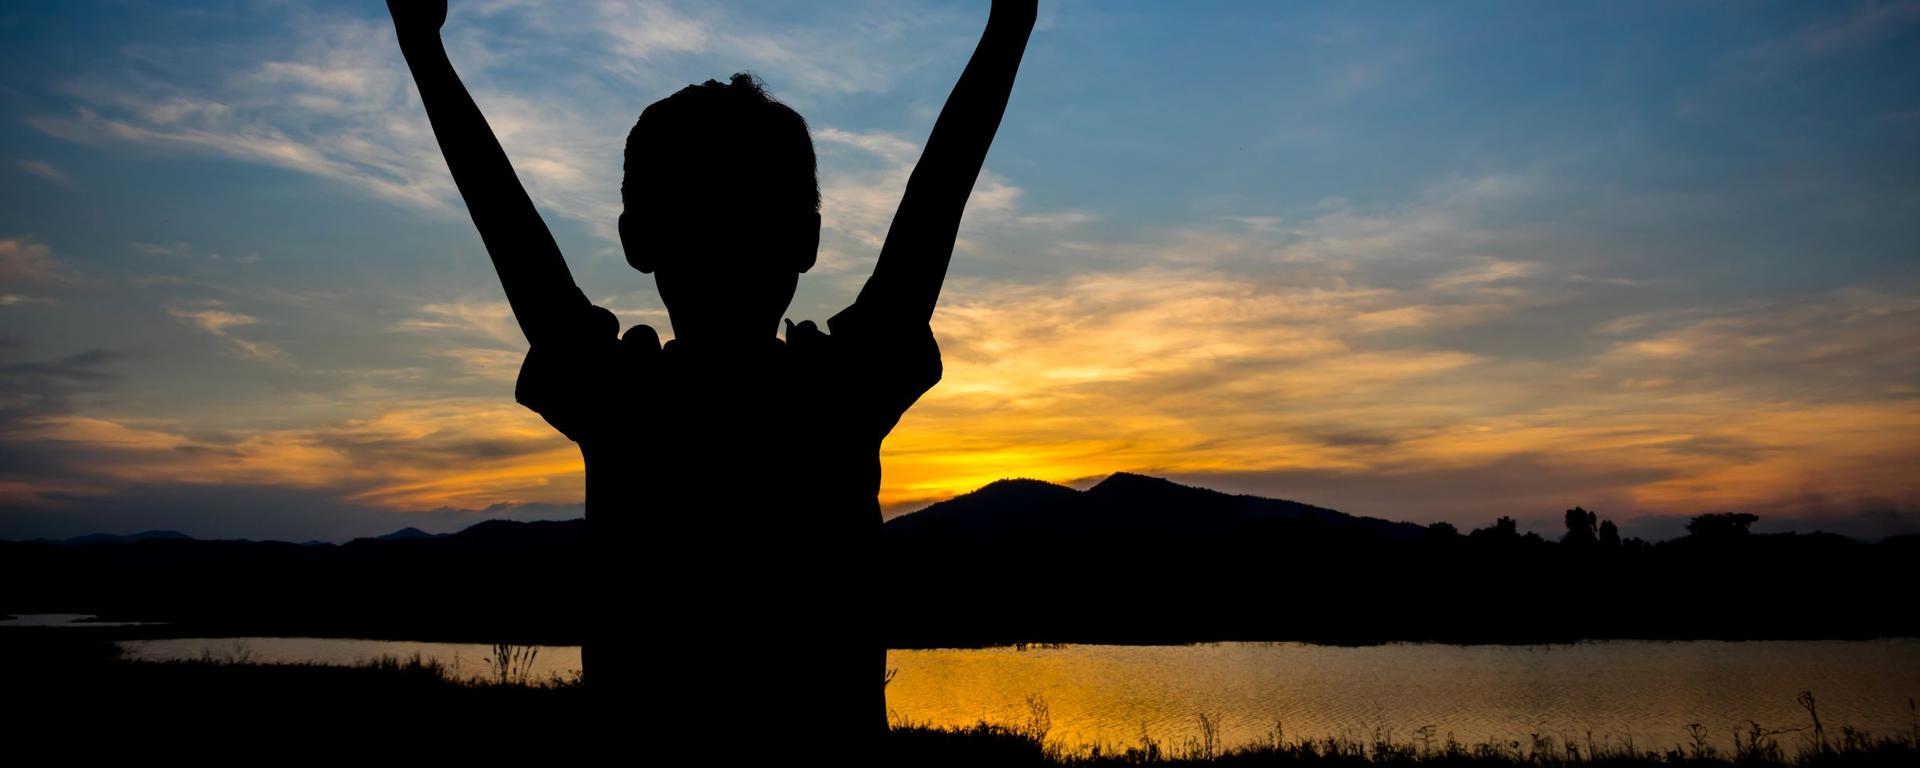 Child with raised arms facing a sunset